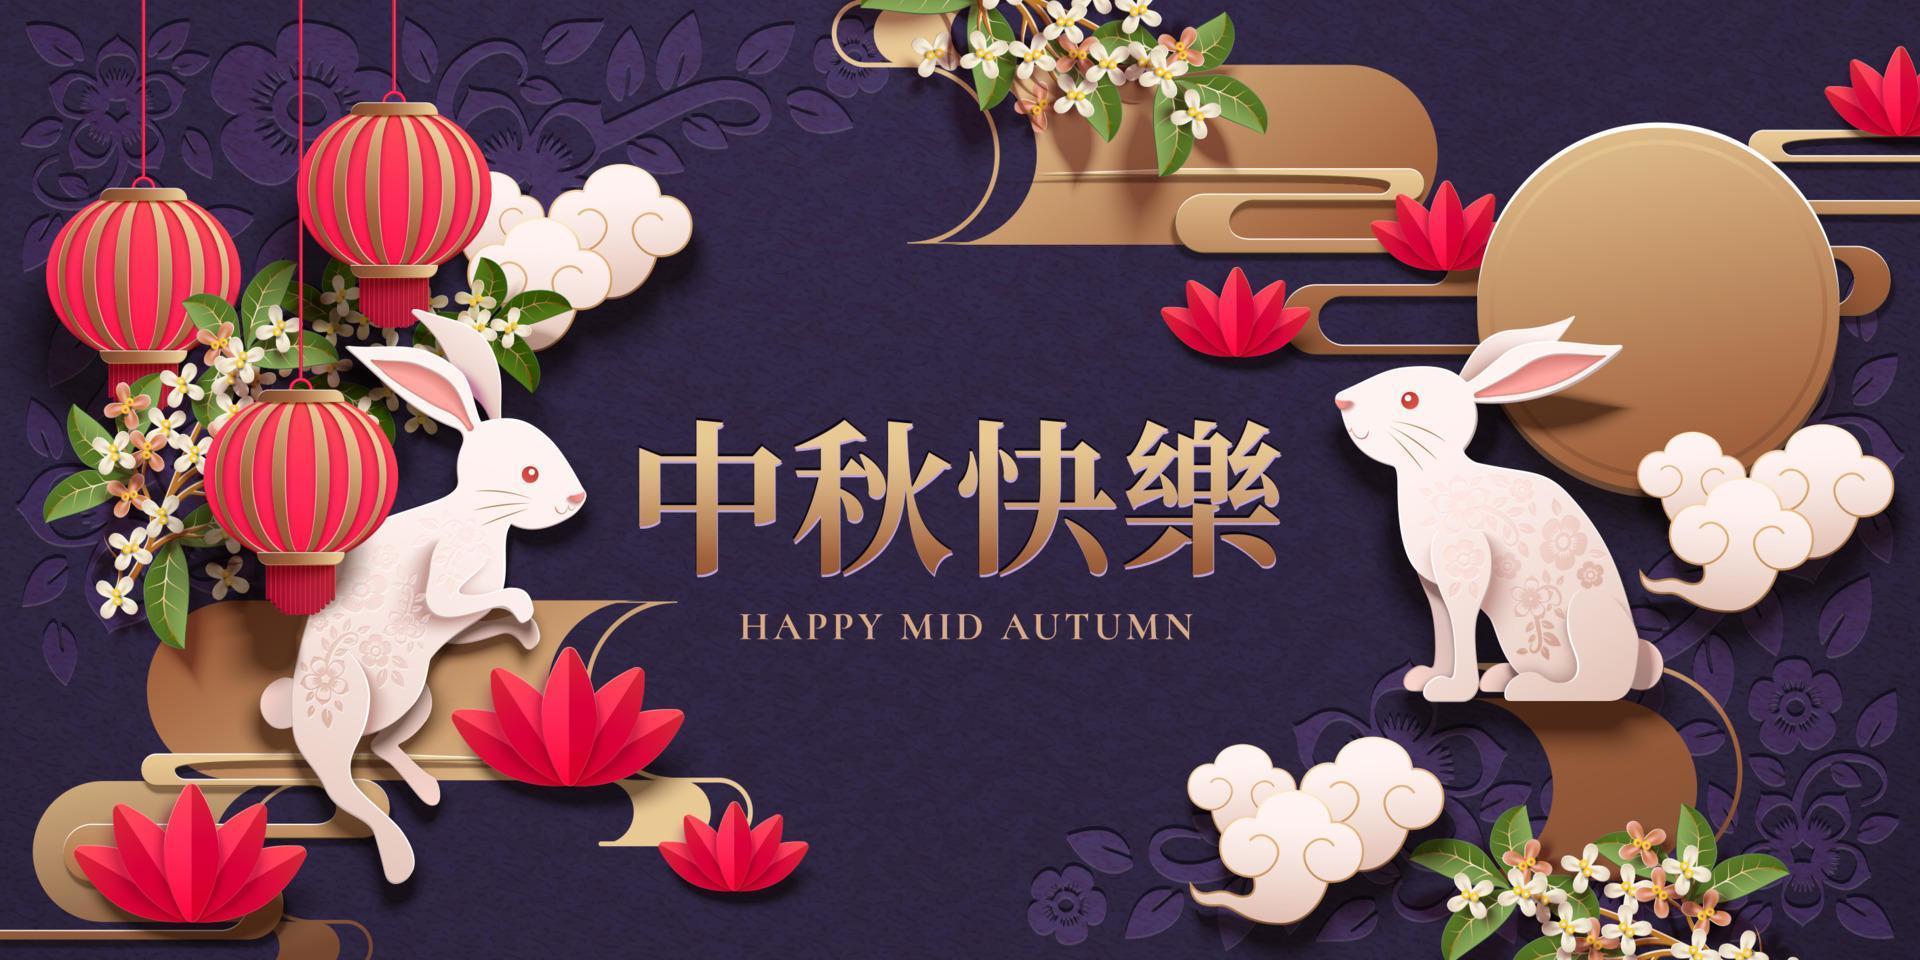 Happy mid autumn festival design with paper art rabbits and red lanterns on purple background, Holiday name written in Chinese words vector